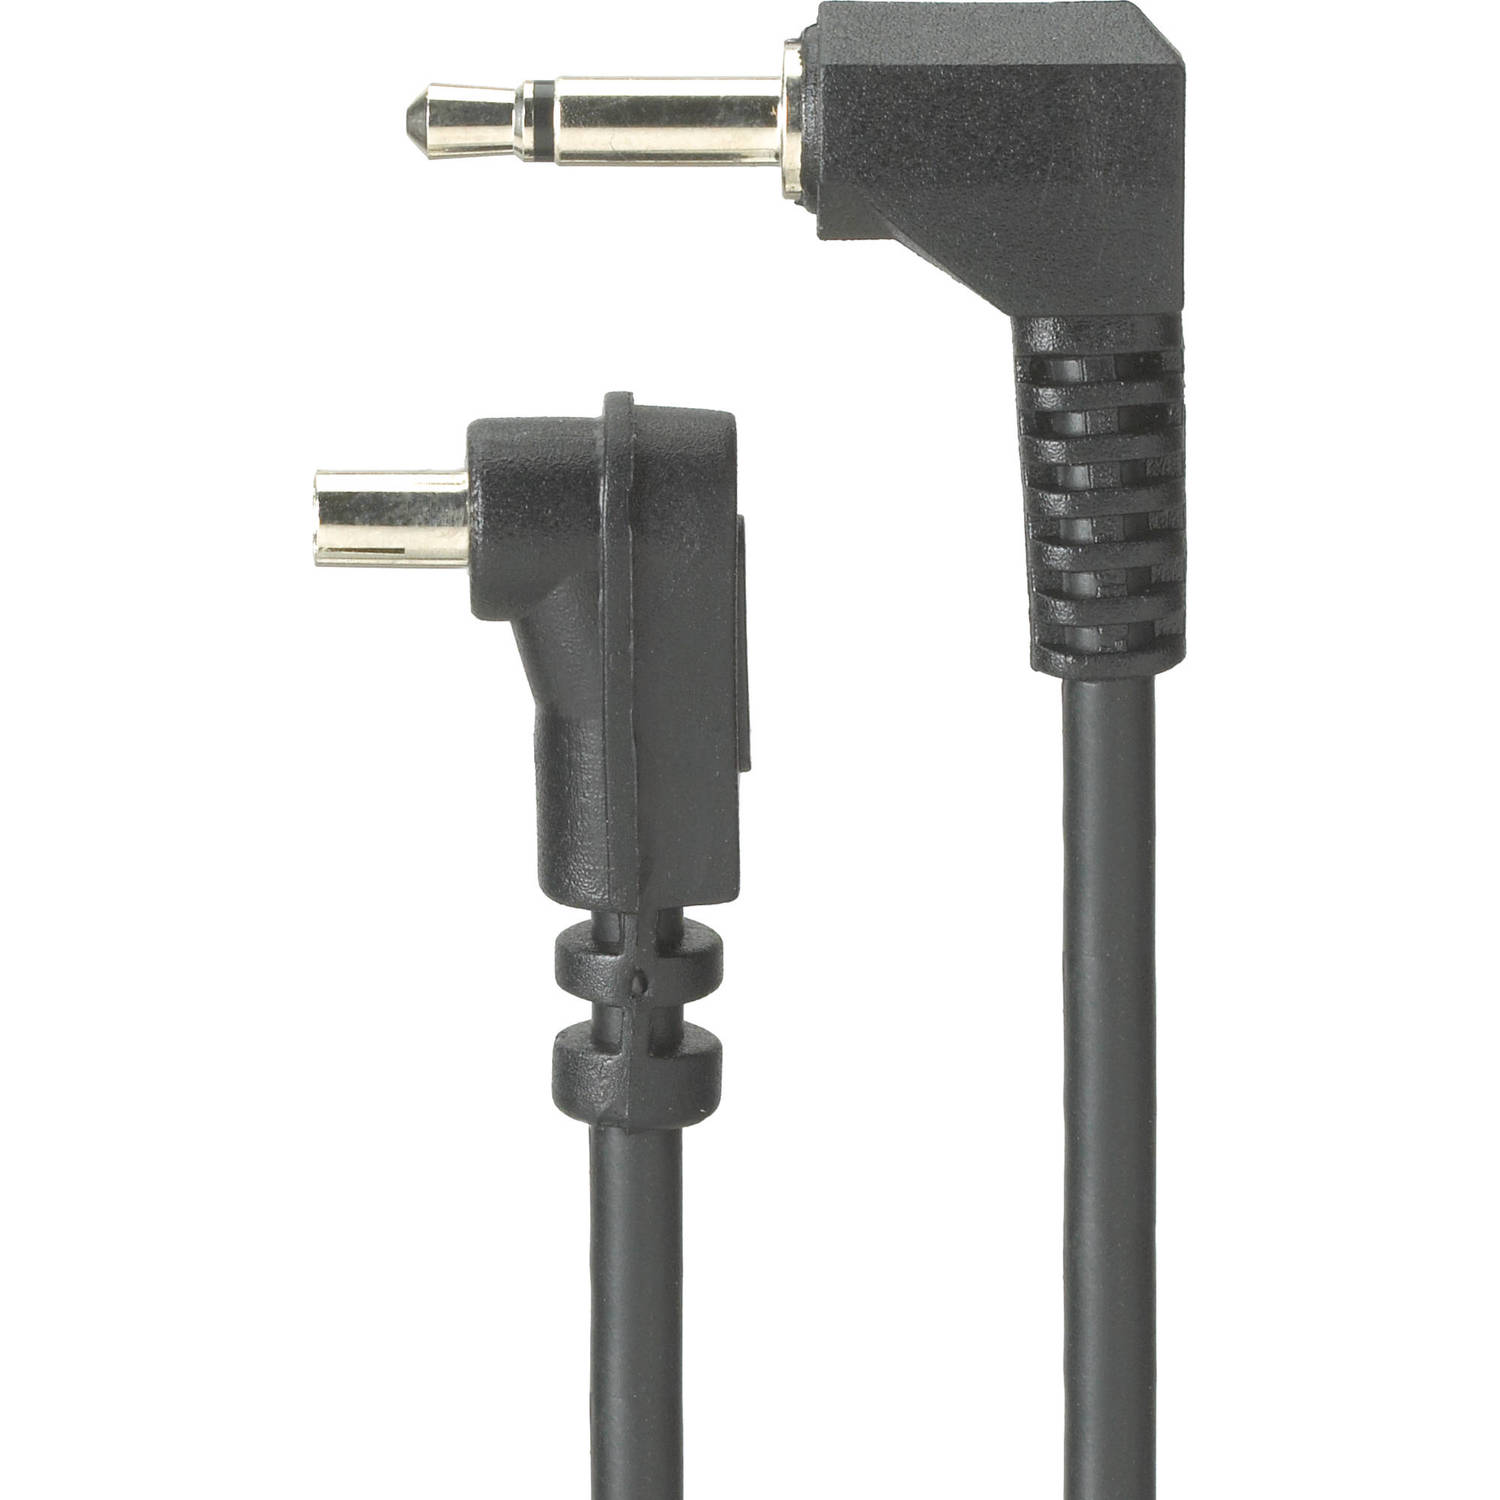 Profoto Male 3.5mm Miniphone to PC Cable - 11.8"